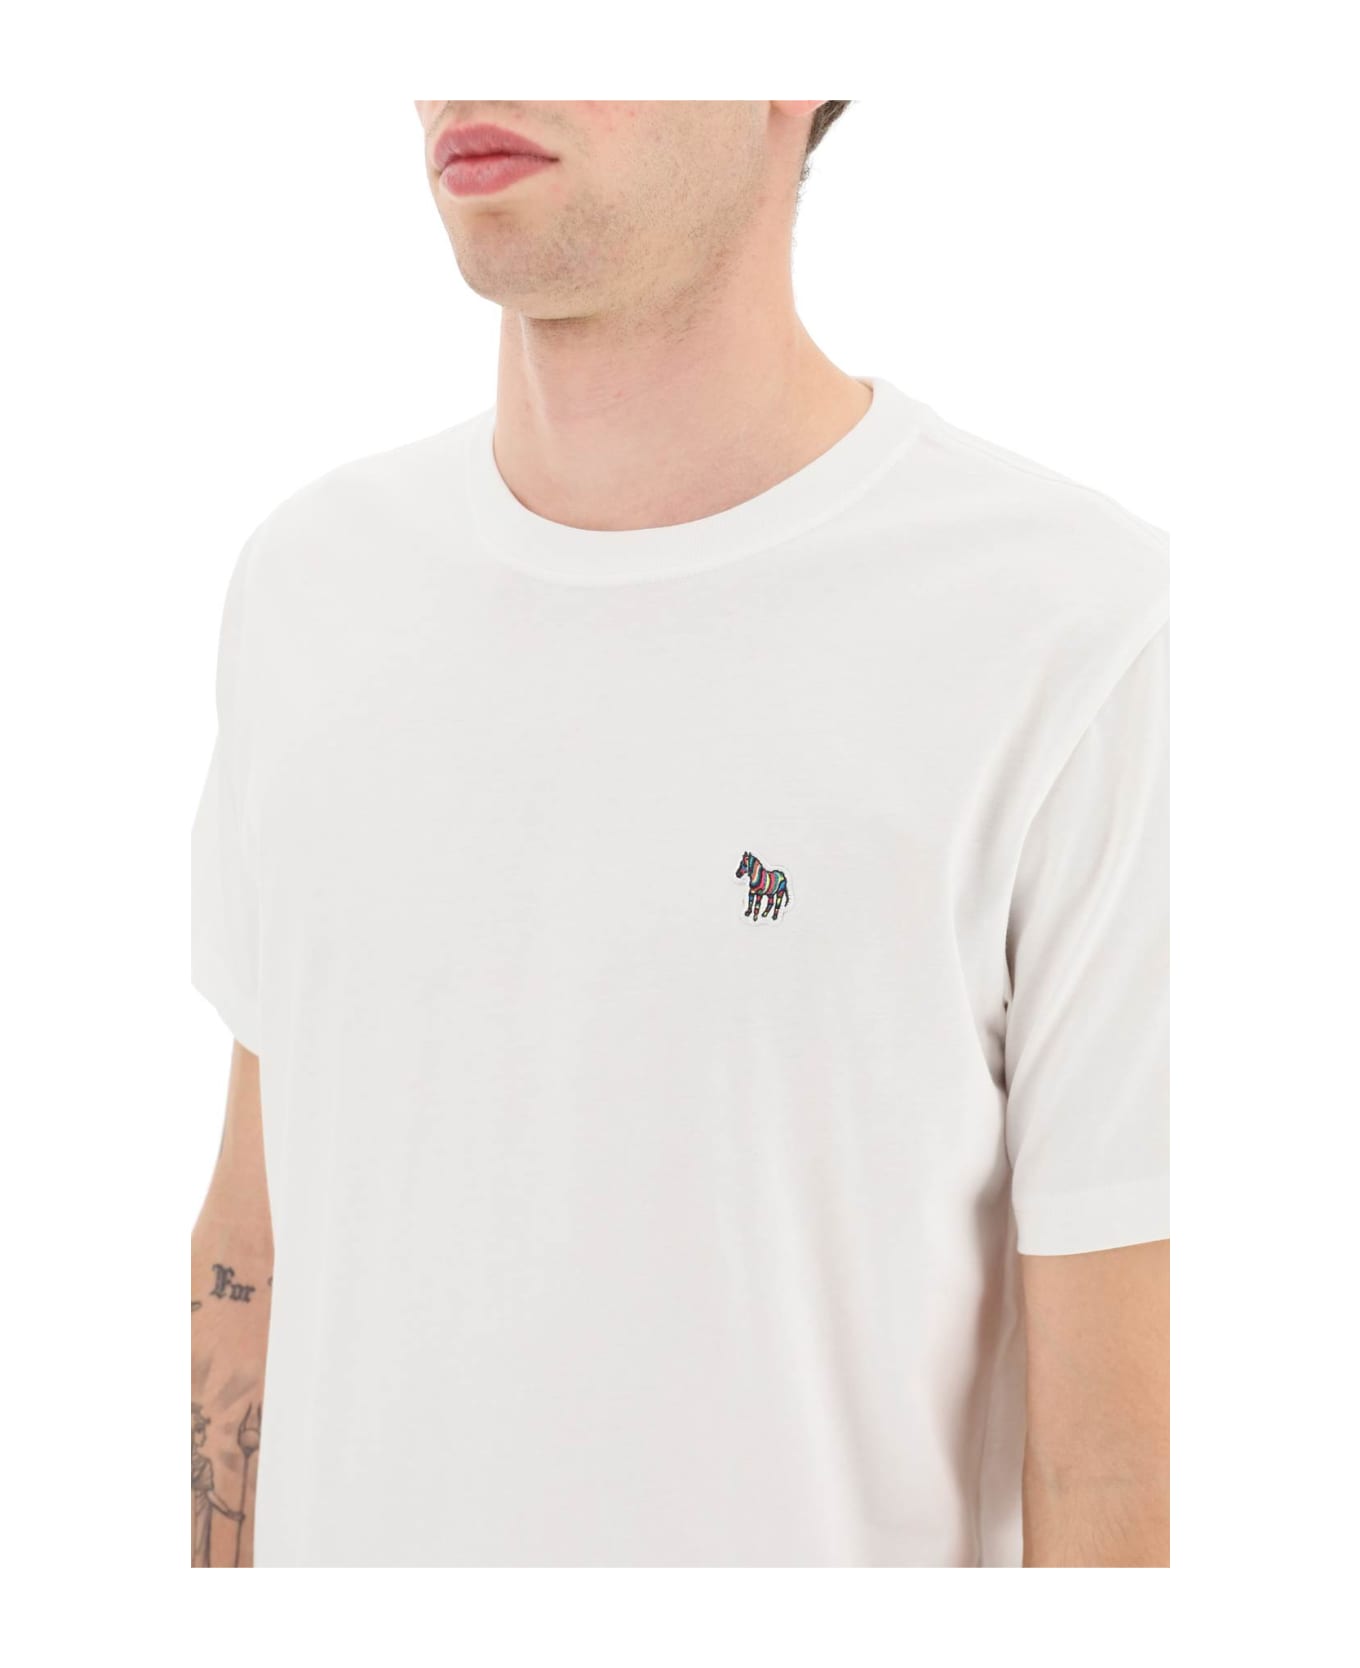 PS by Paul Smith Zebra Patch T-shirt - WHITE (White) シャツ